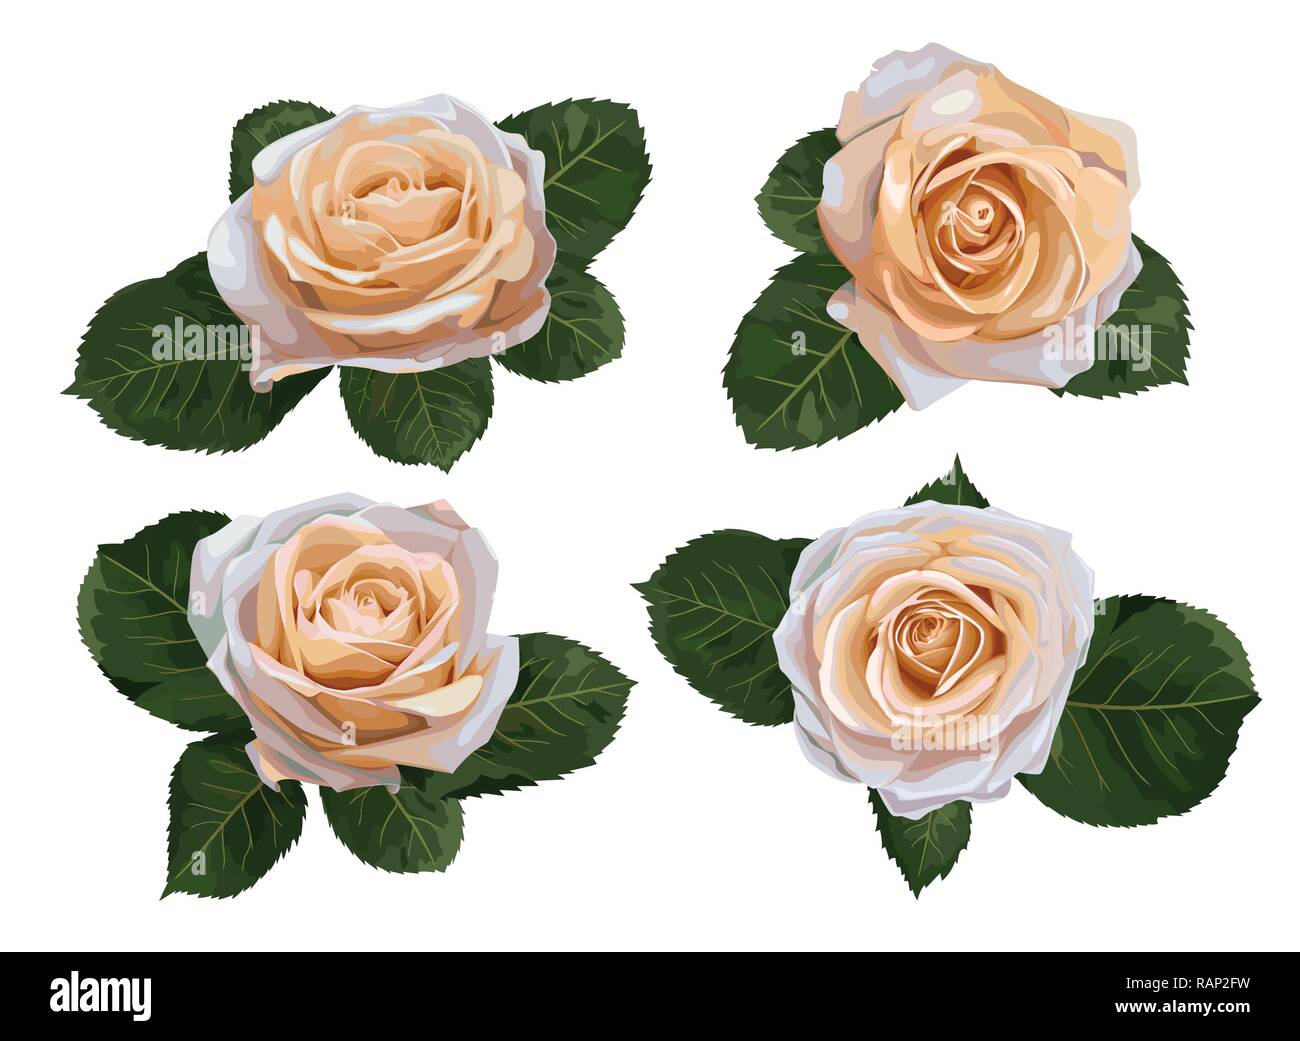 Set of vector watercolor tea roses isolated on white background. For the design of wedding invitations, greeting cards, flyers, fabric, certificates,  Stock Vector